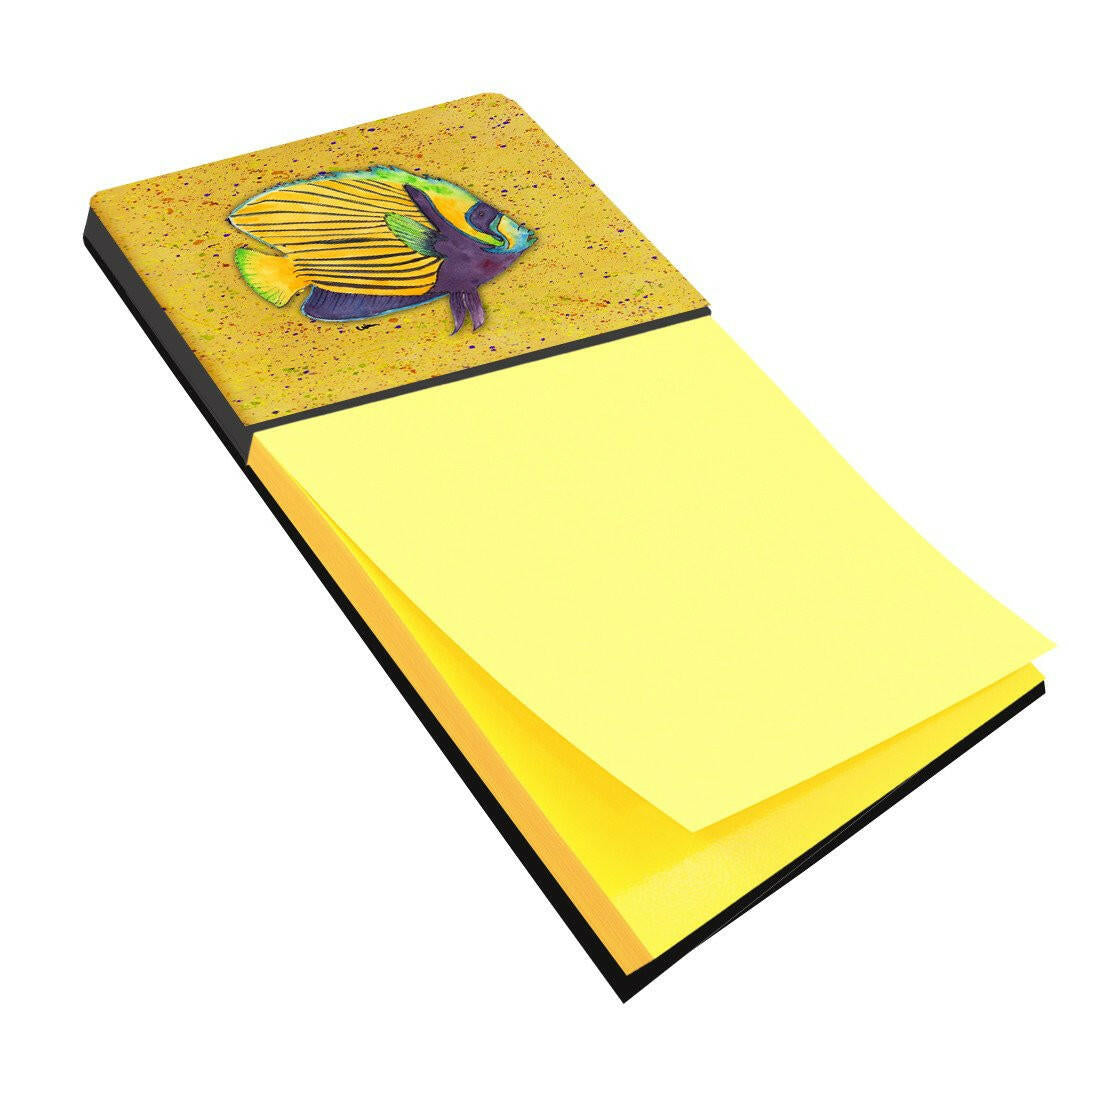 Tropical Fish on Mustard Refiillable Sticky Note Holder or Postit Note Dispenser 8577SN by Caroline's Treasures